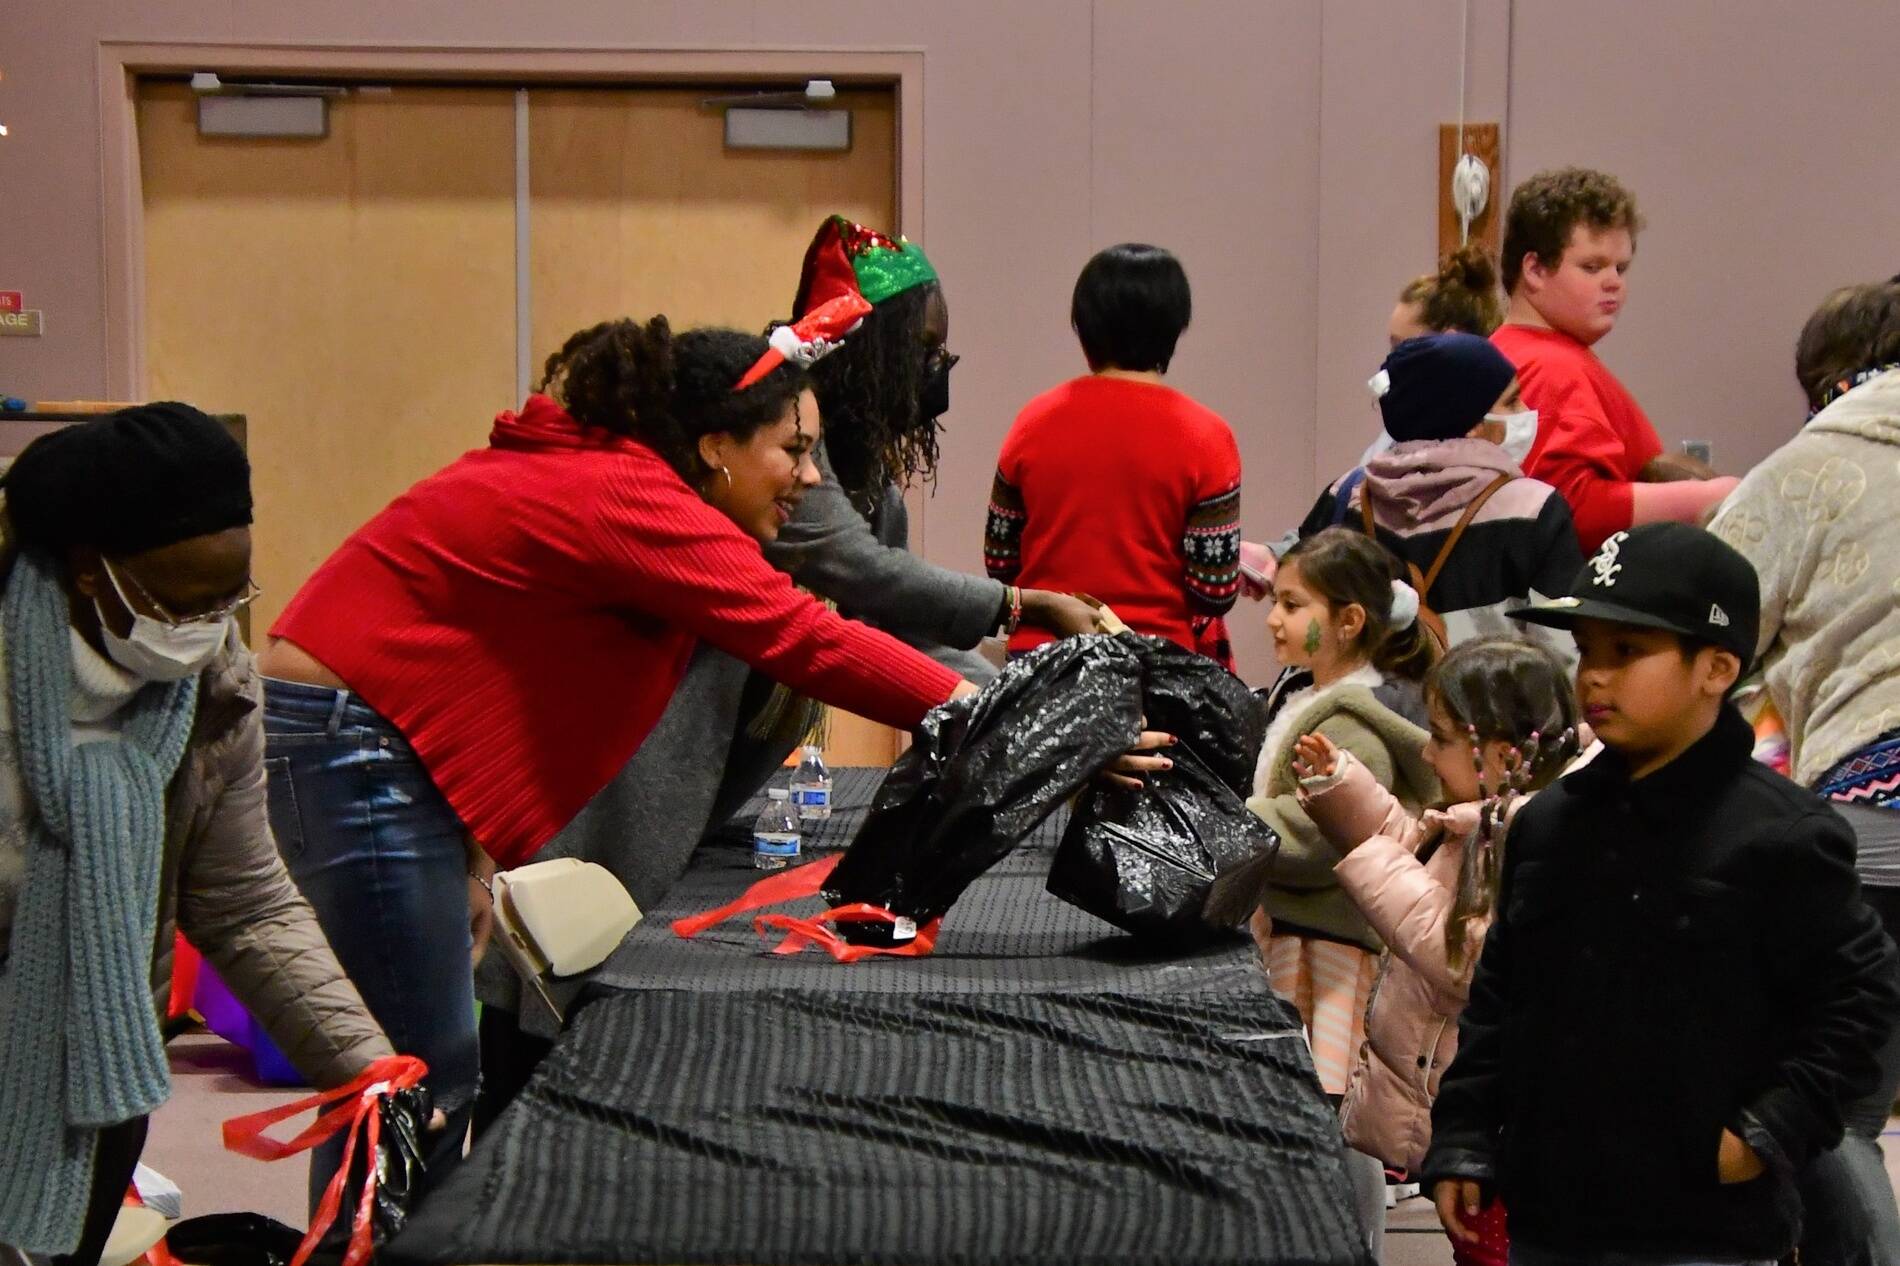 Local teacher hosts Winter Celebration for Federal Way students